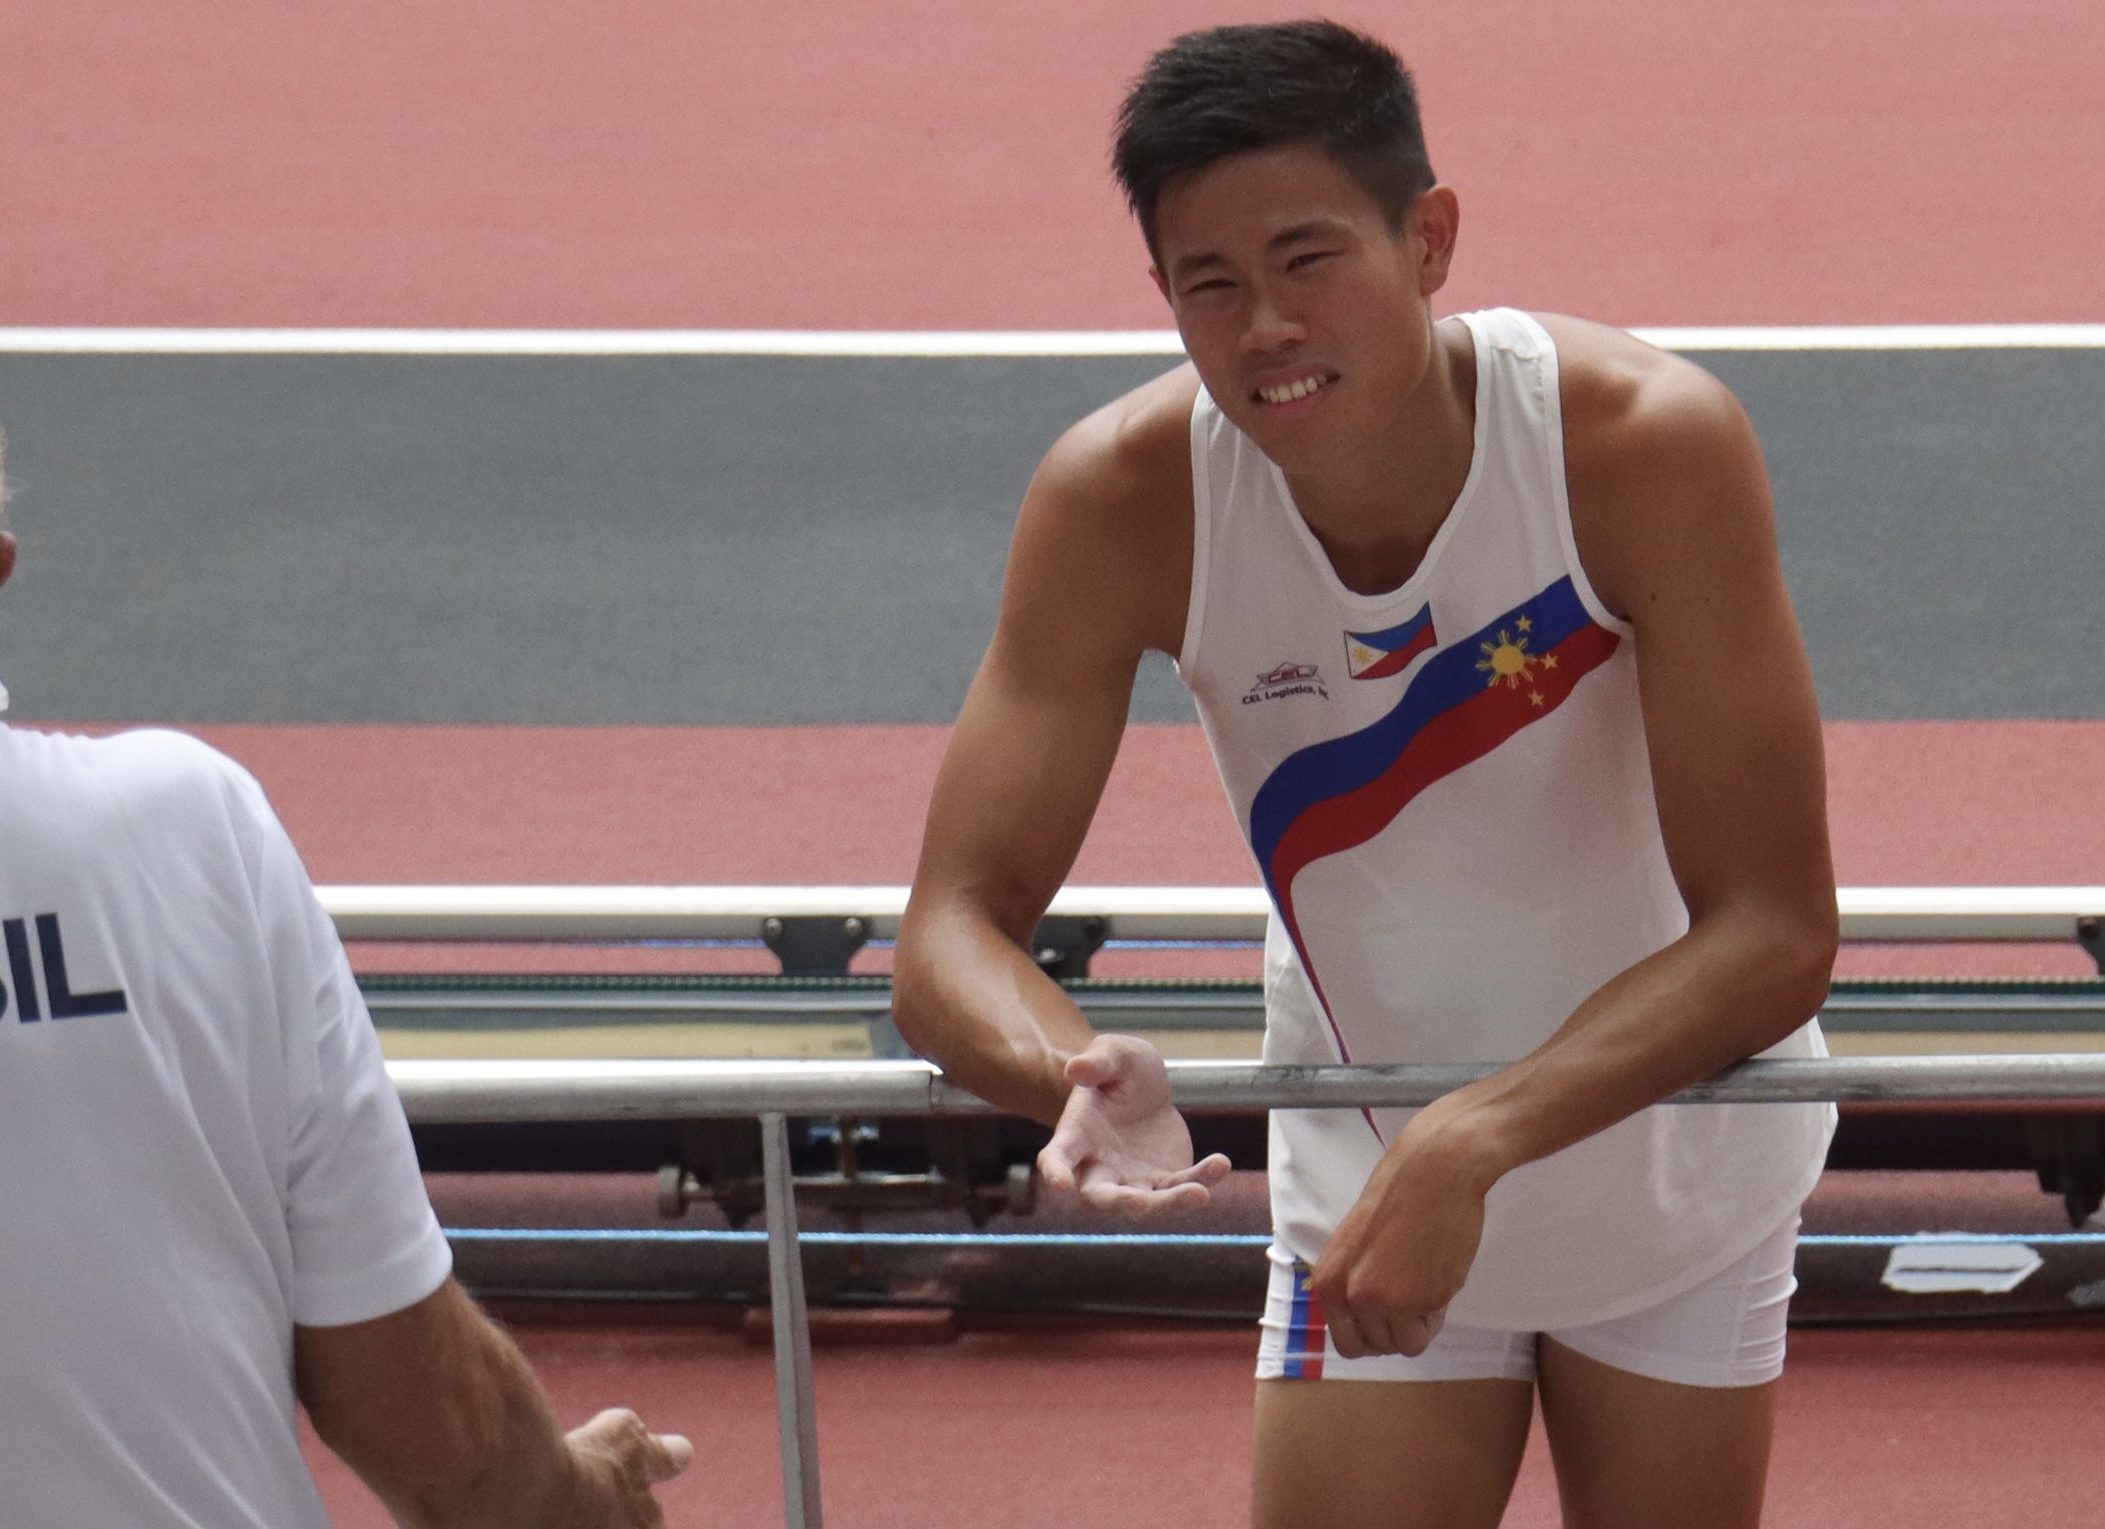 EJ Obiena at the stands after an attempt in the men's pole vault qualification